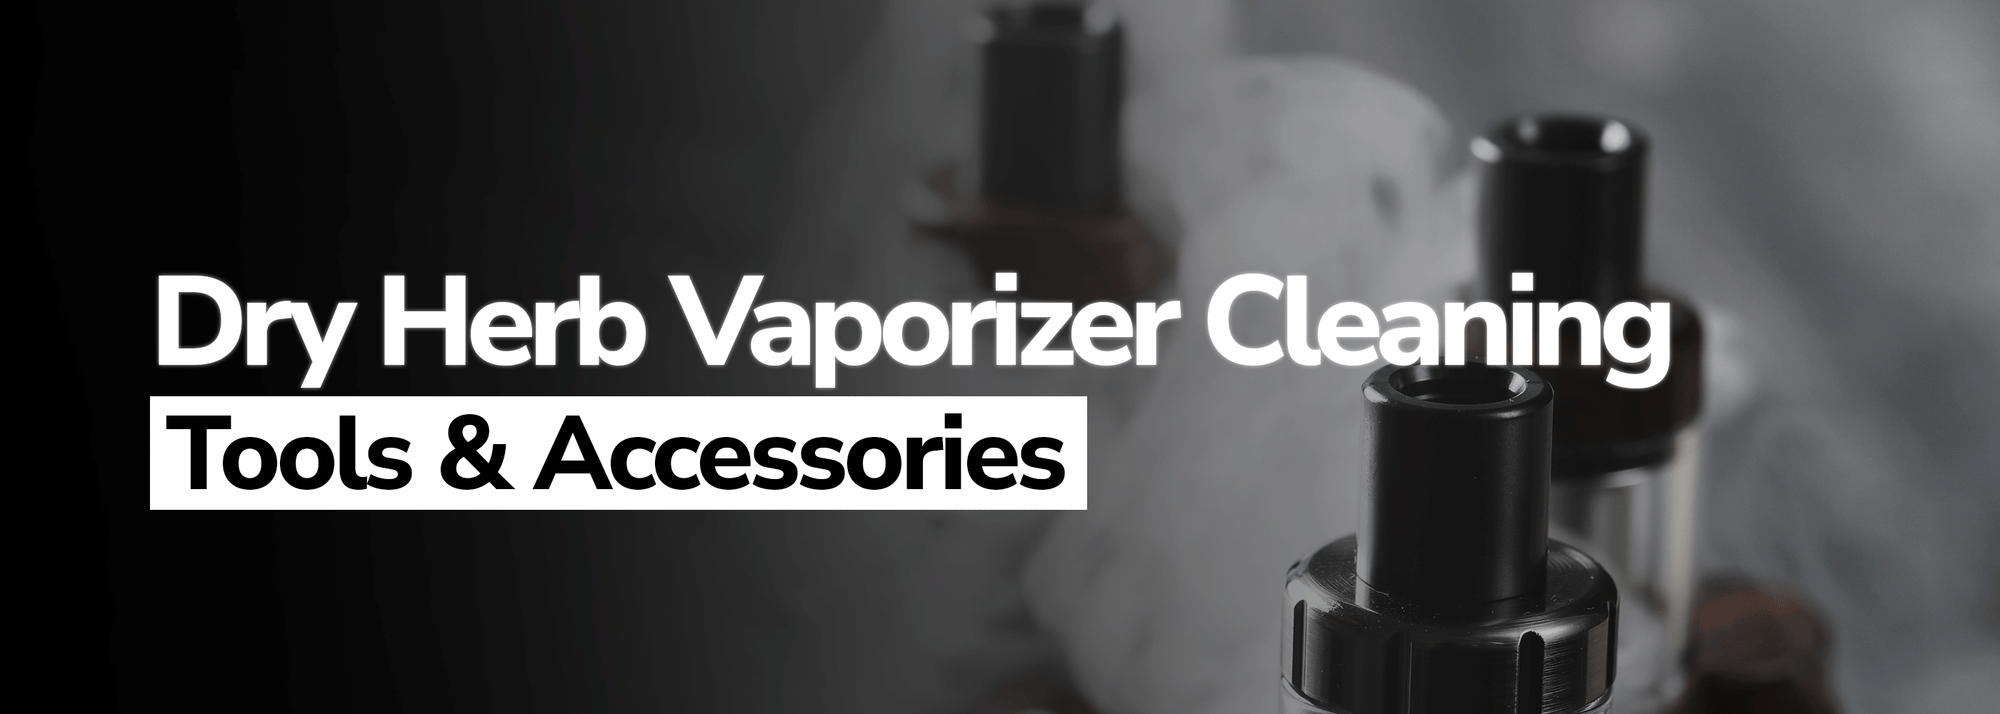 Buy Dry Herb Vaporizer Cleaning Accessories - Wick and Wire Co Melbourne Vape Shop, Victoria Australia